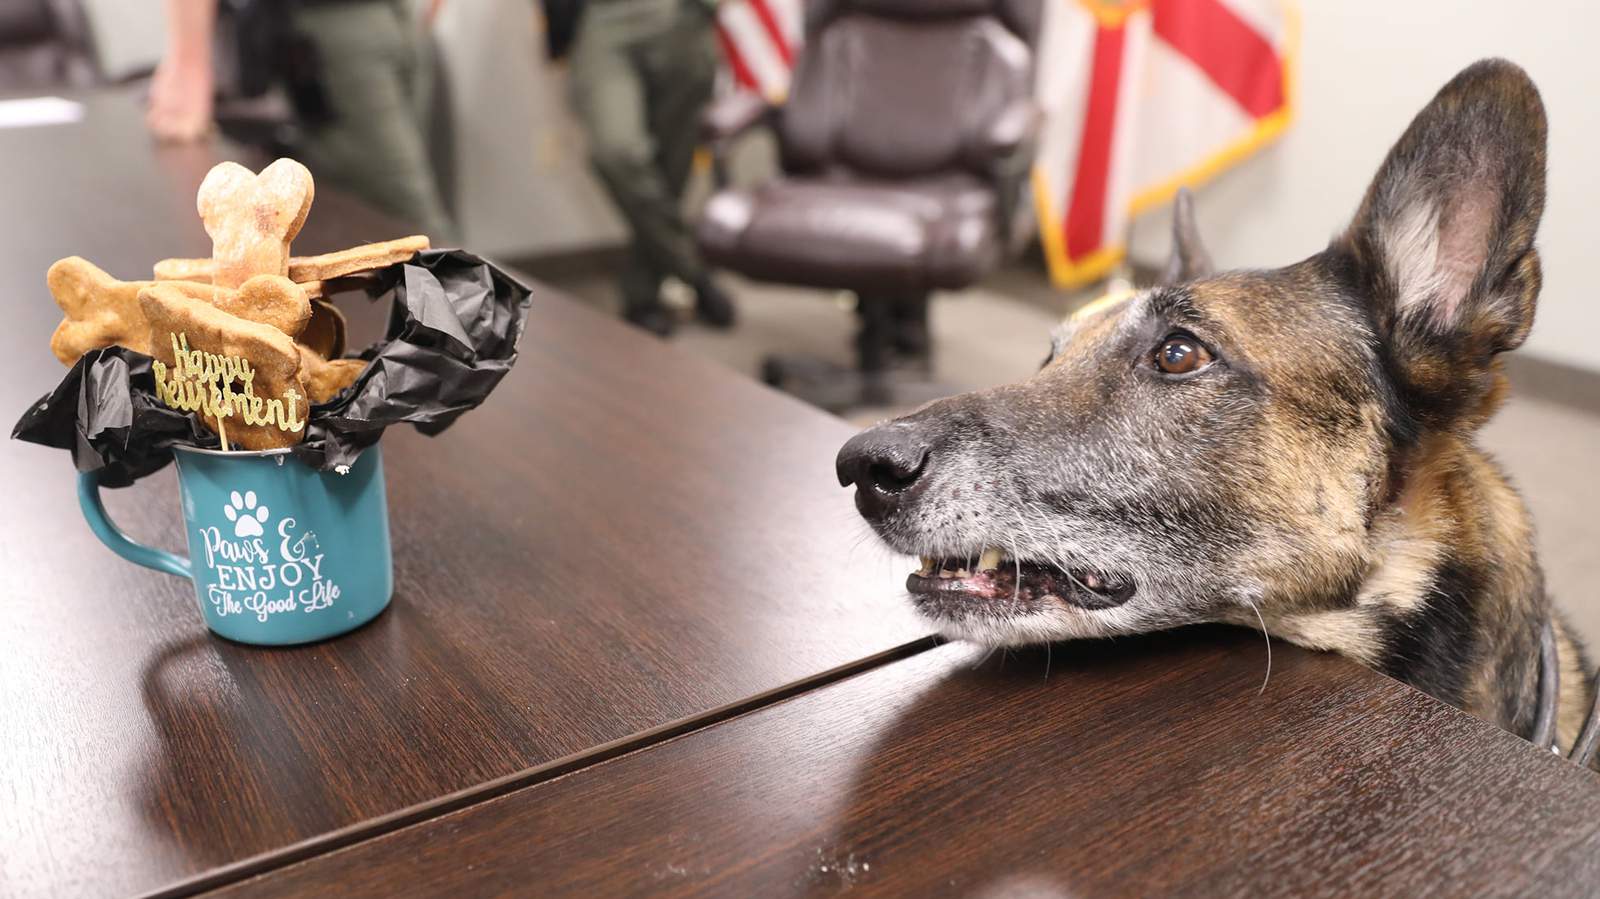 Cutest photos you’ll see today! Putnam County K-9 retires